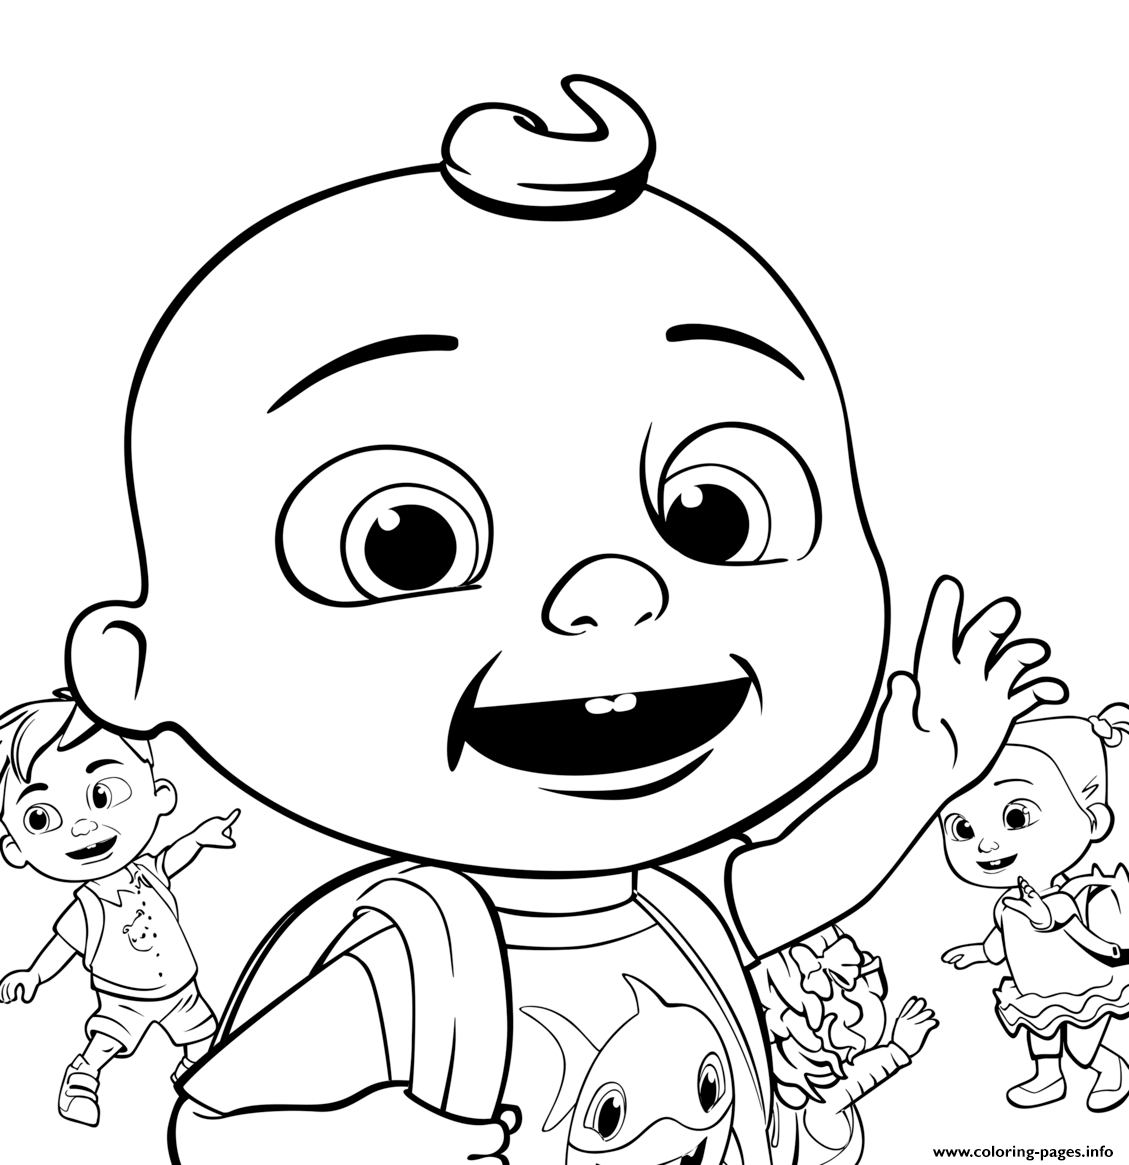 Coloring Pages Printable Coloring Pages Free